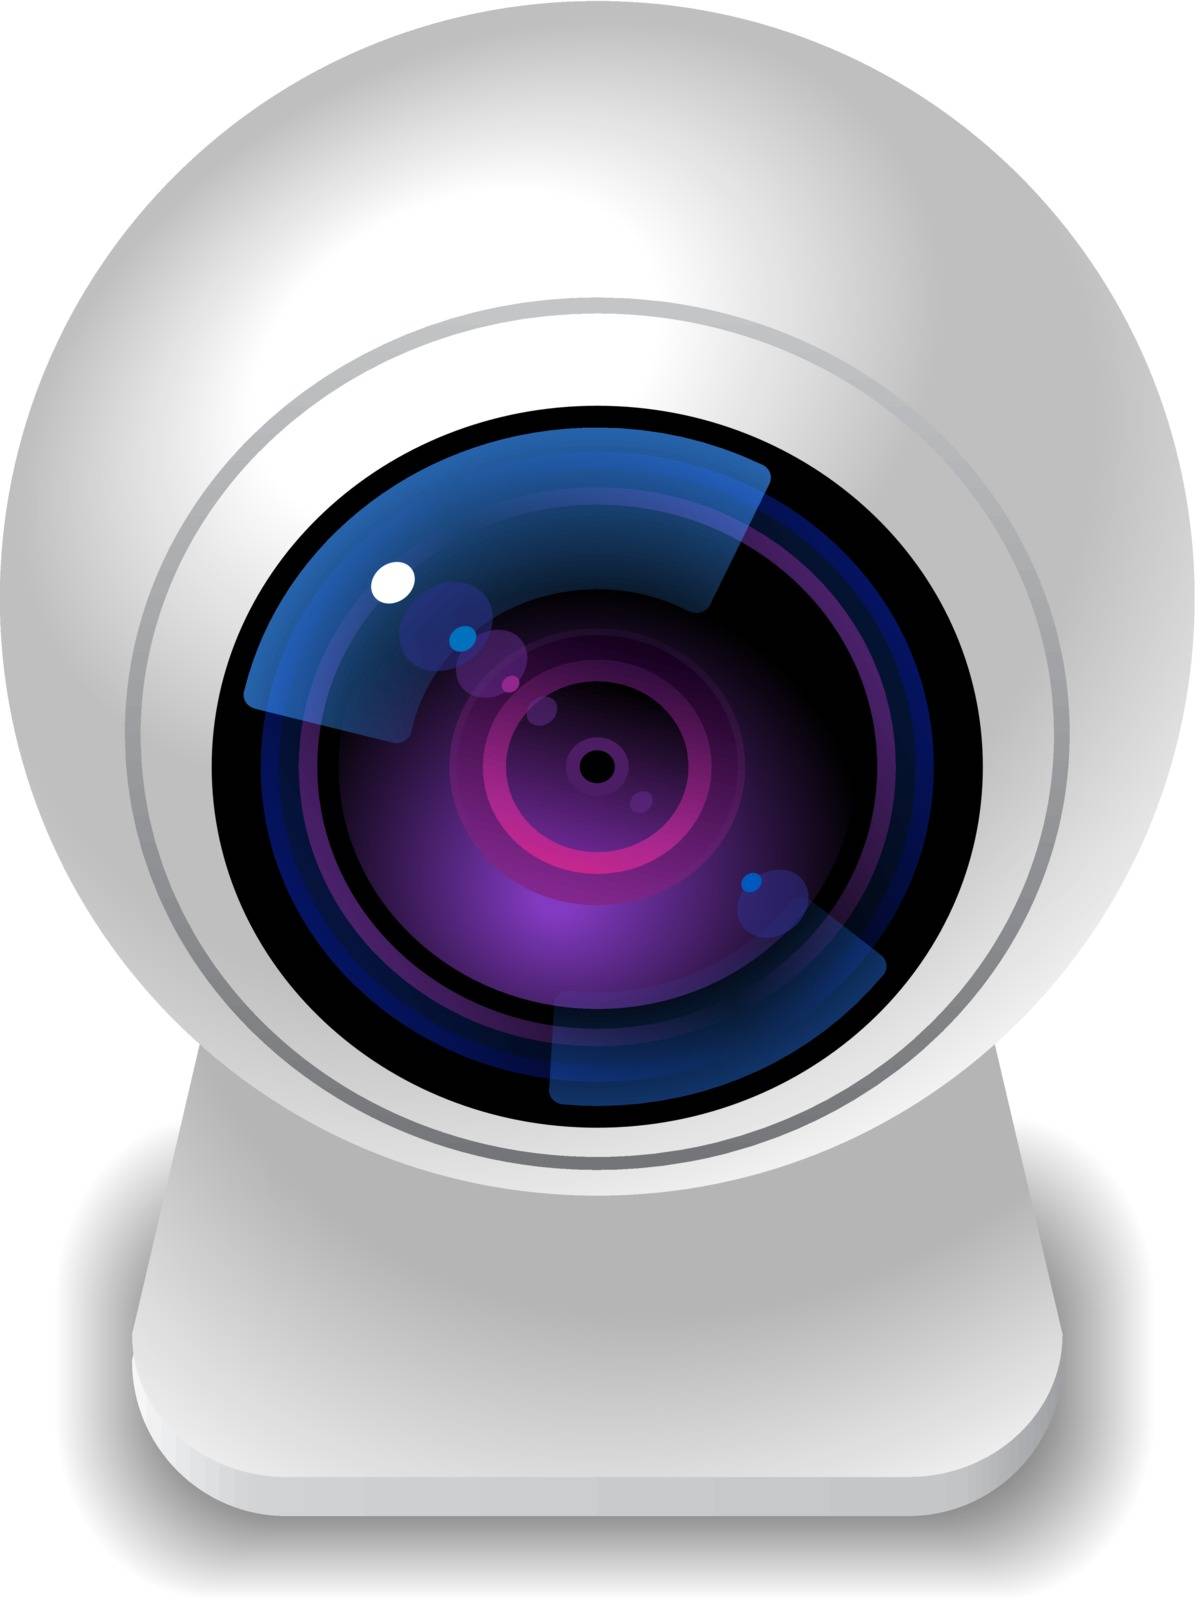 Icon for webcam. White background. Vector saved as eps-10, file contains objects with transparency.